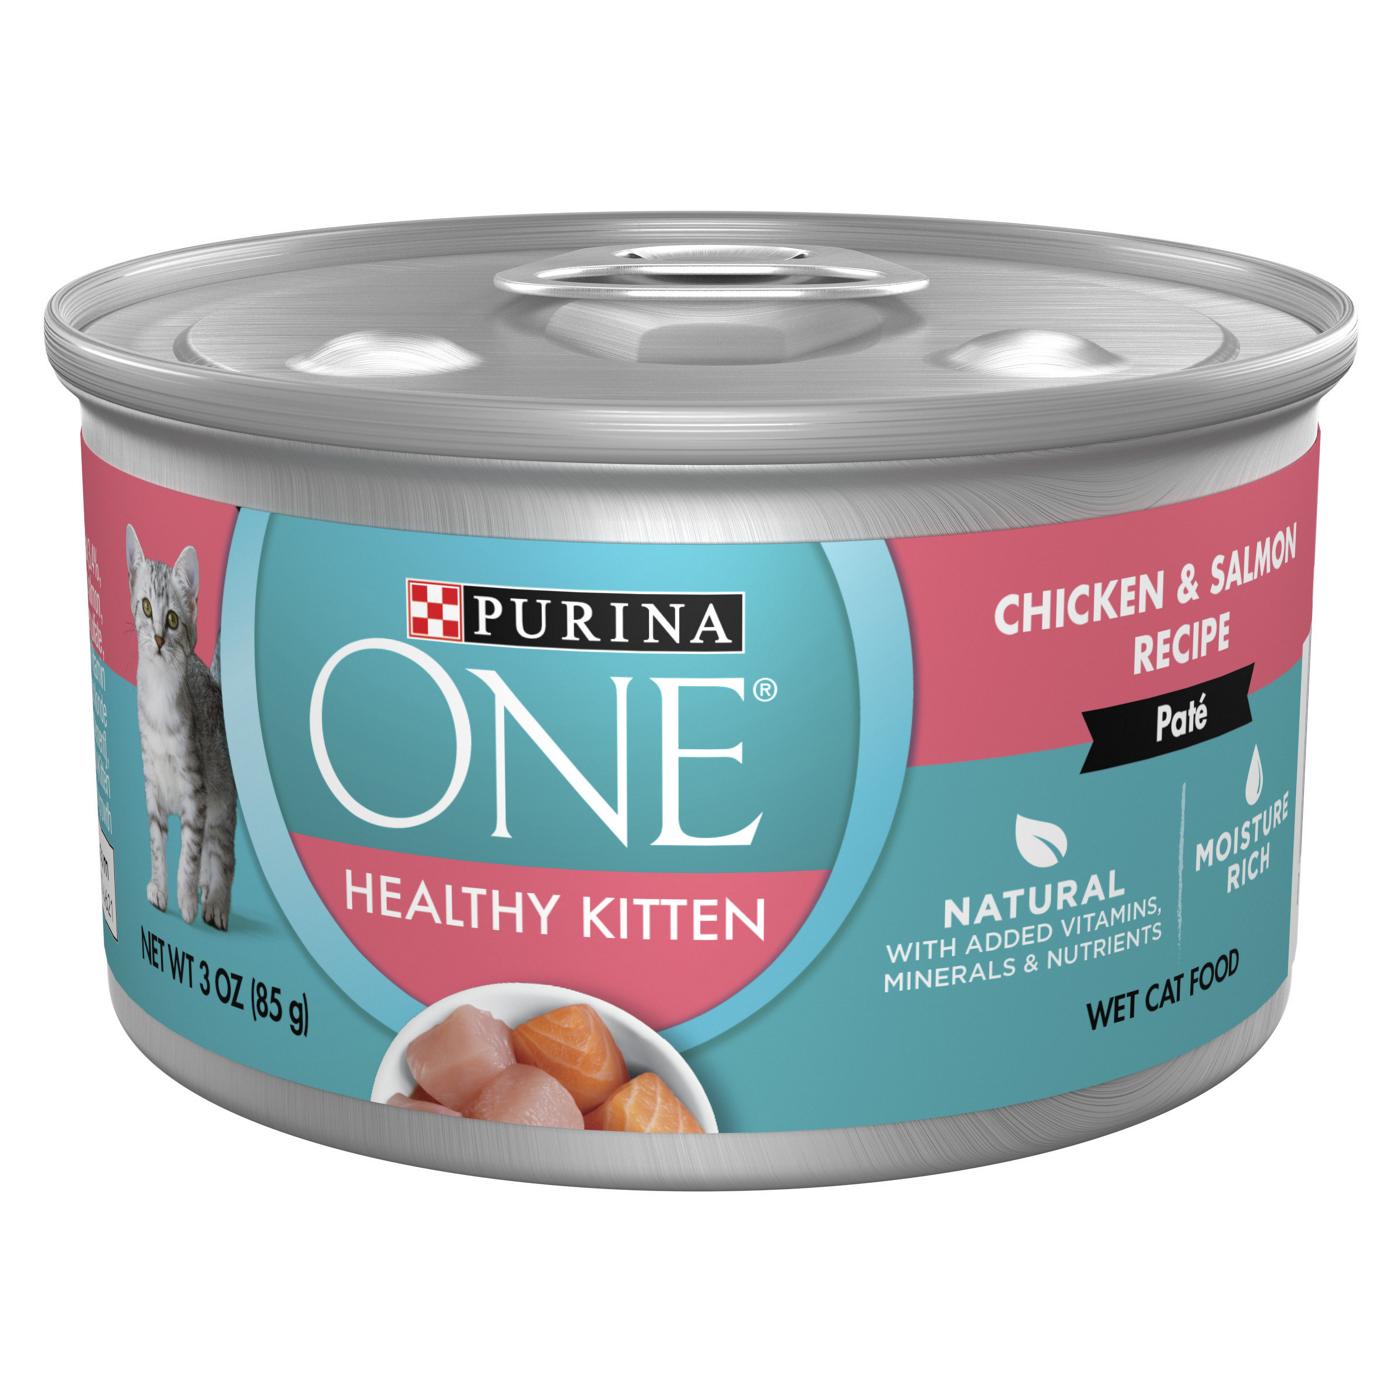 Purina ONE One Healthy Kitten Pate Wet Cat Food - Chicken & Salmon Recipe ; image 1 of 6